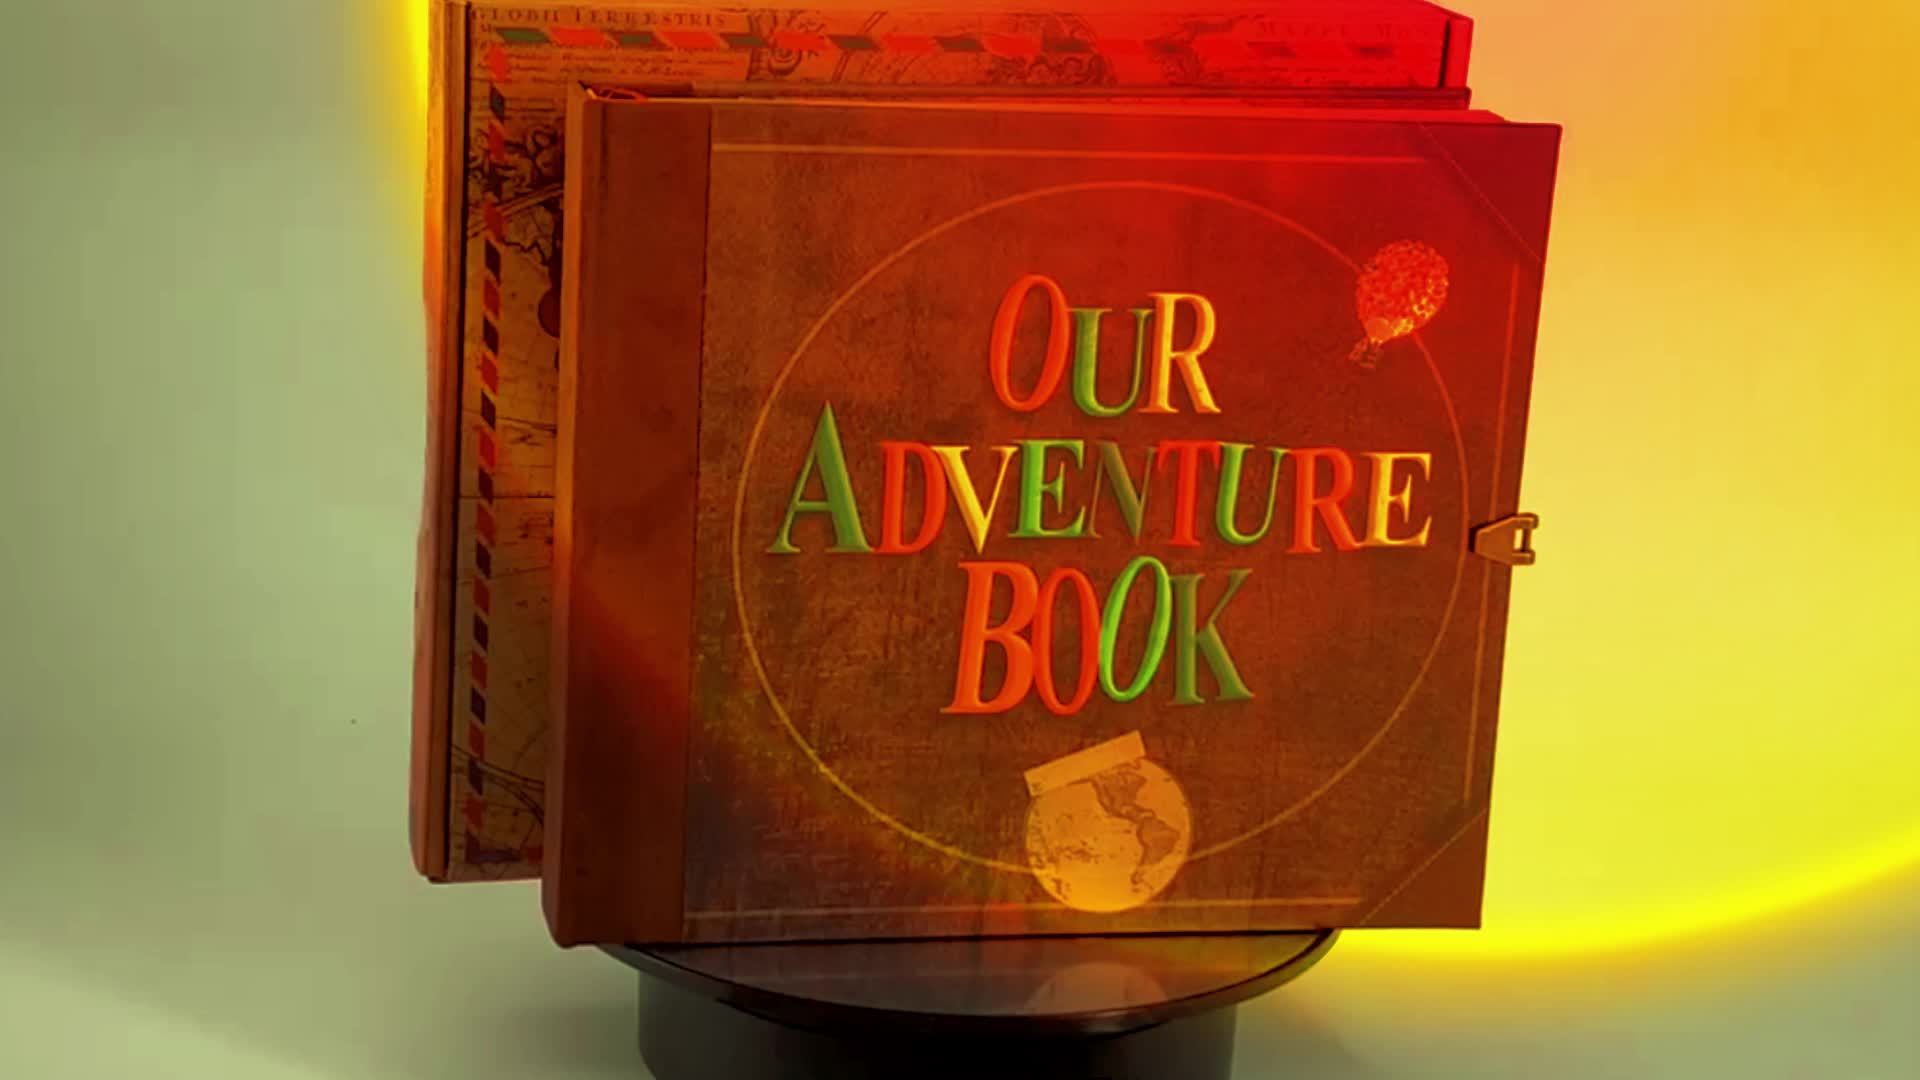 Our Adventure book